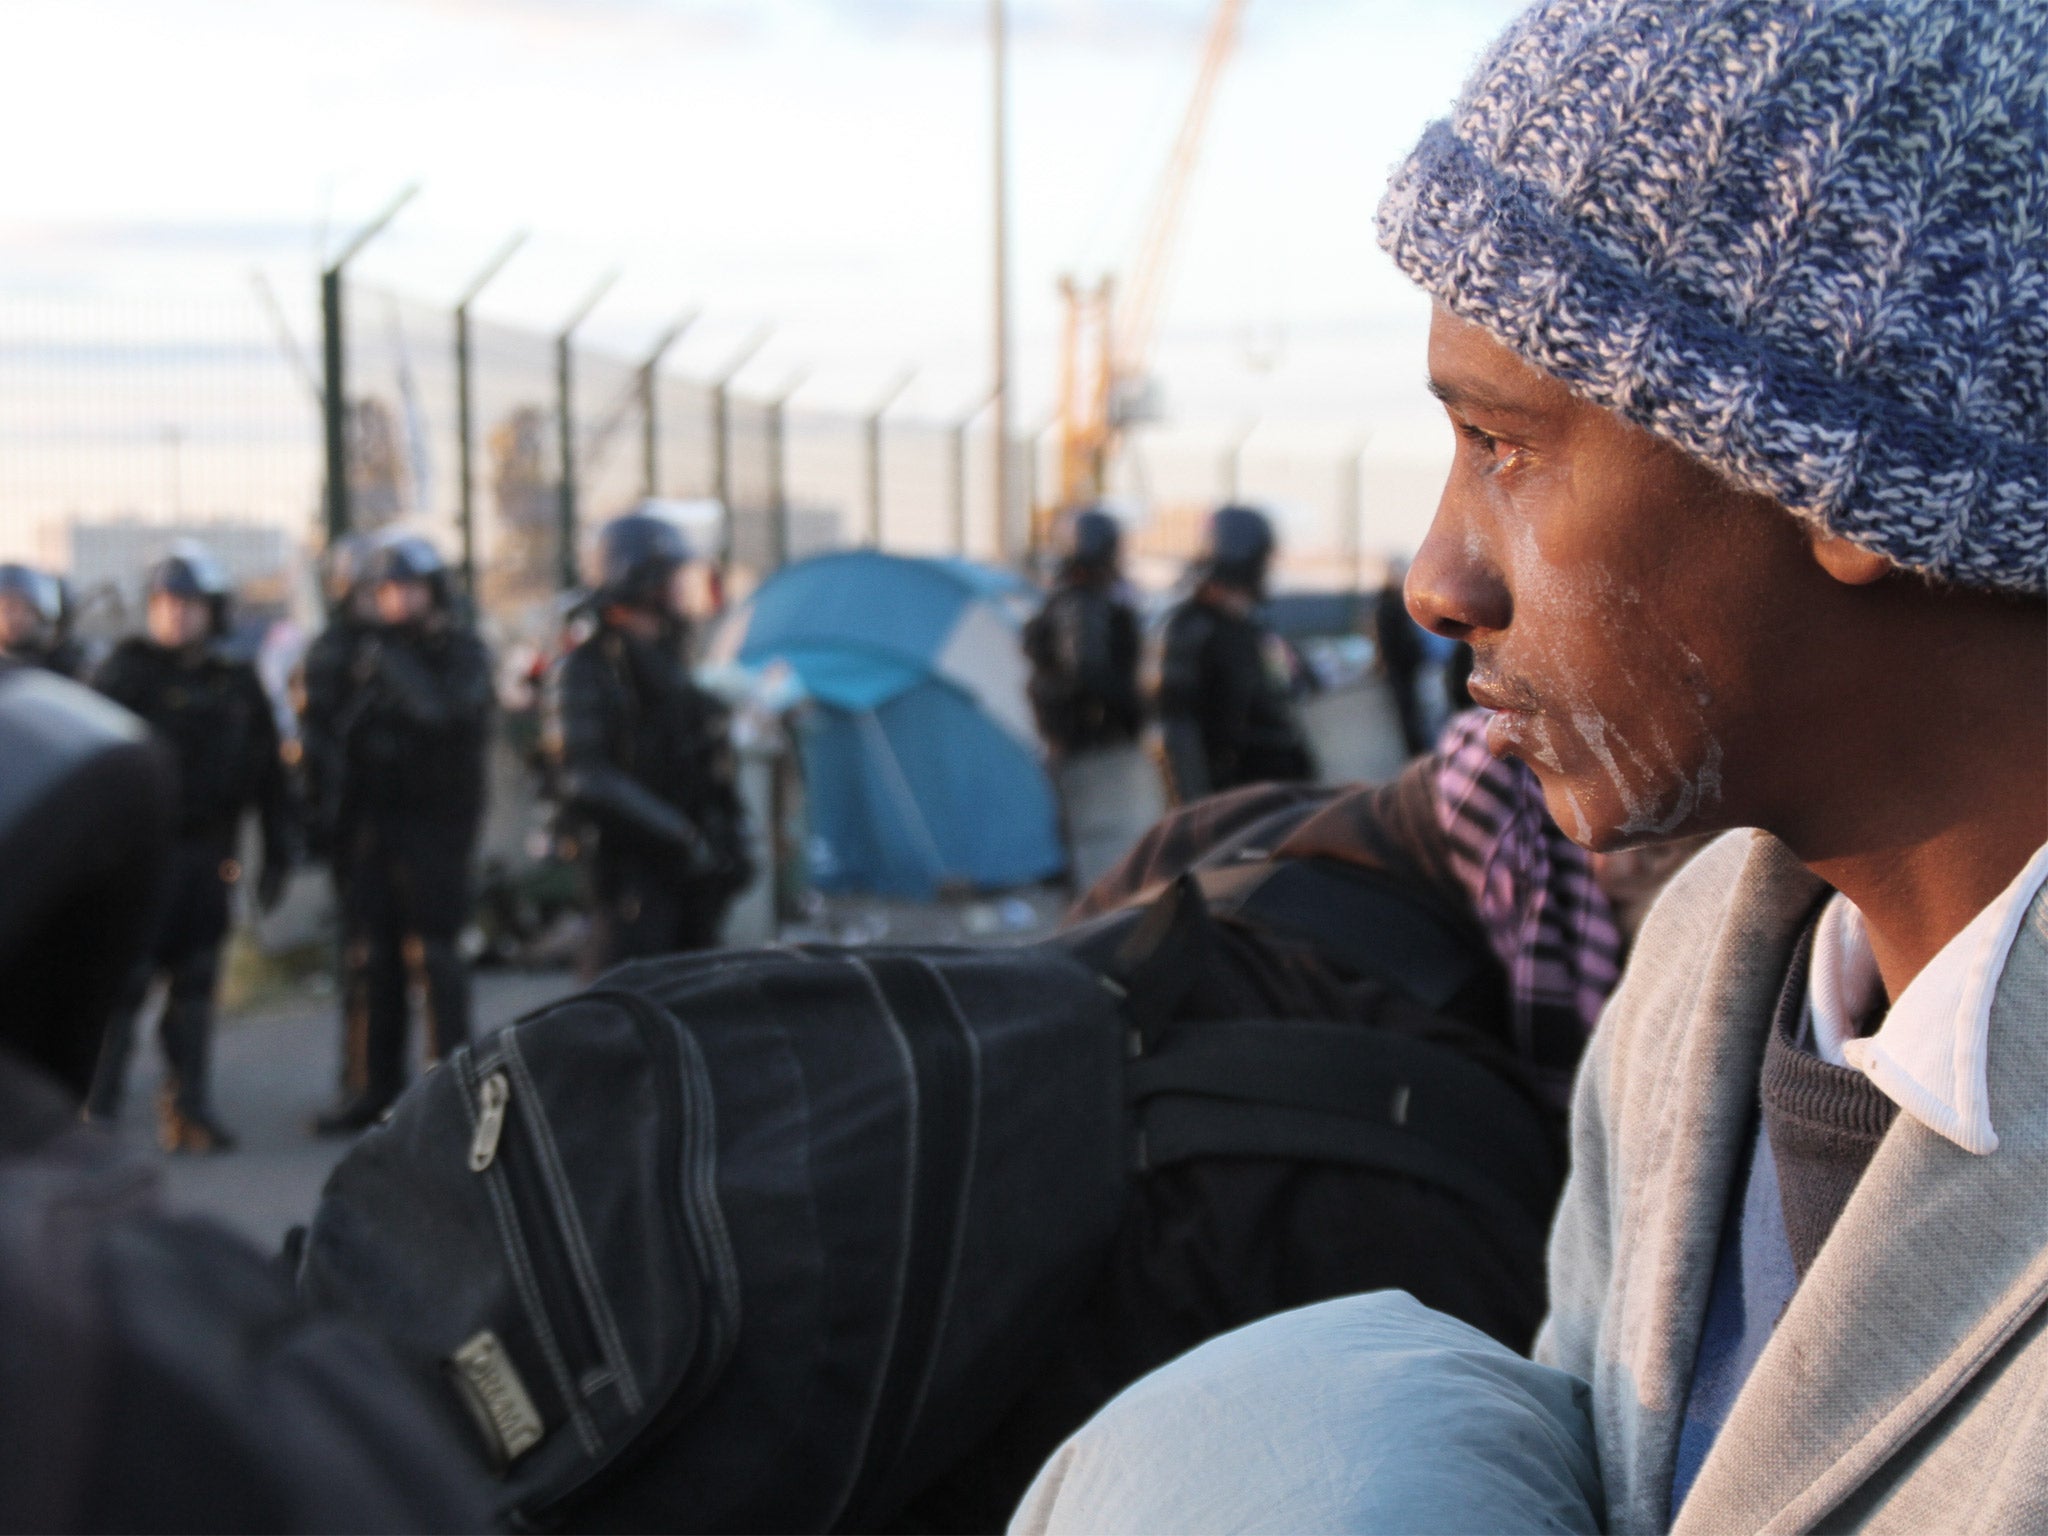 A migrant, his face streaked with the after-effects of tear gas, awaits transportation to a detention centre following the clearance of a camp in Calais